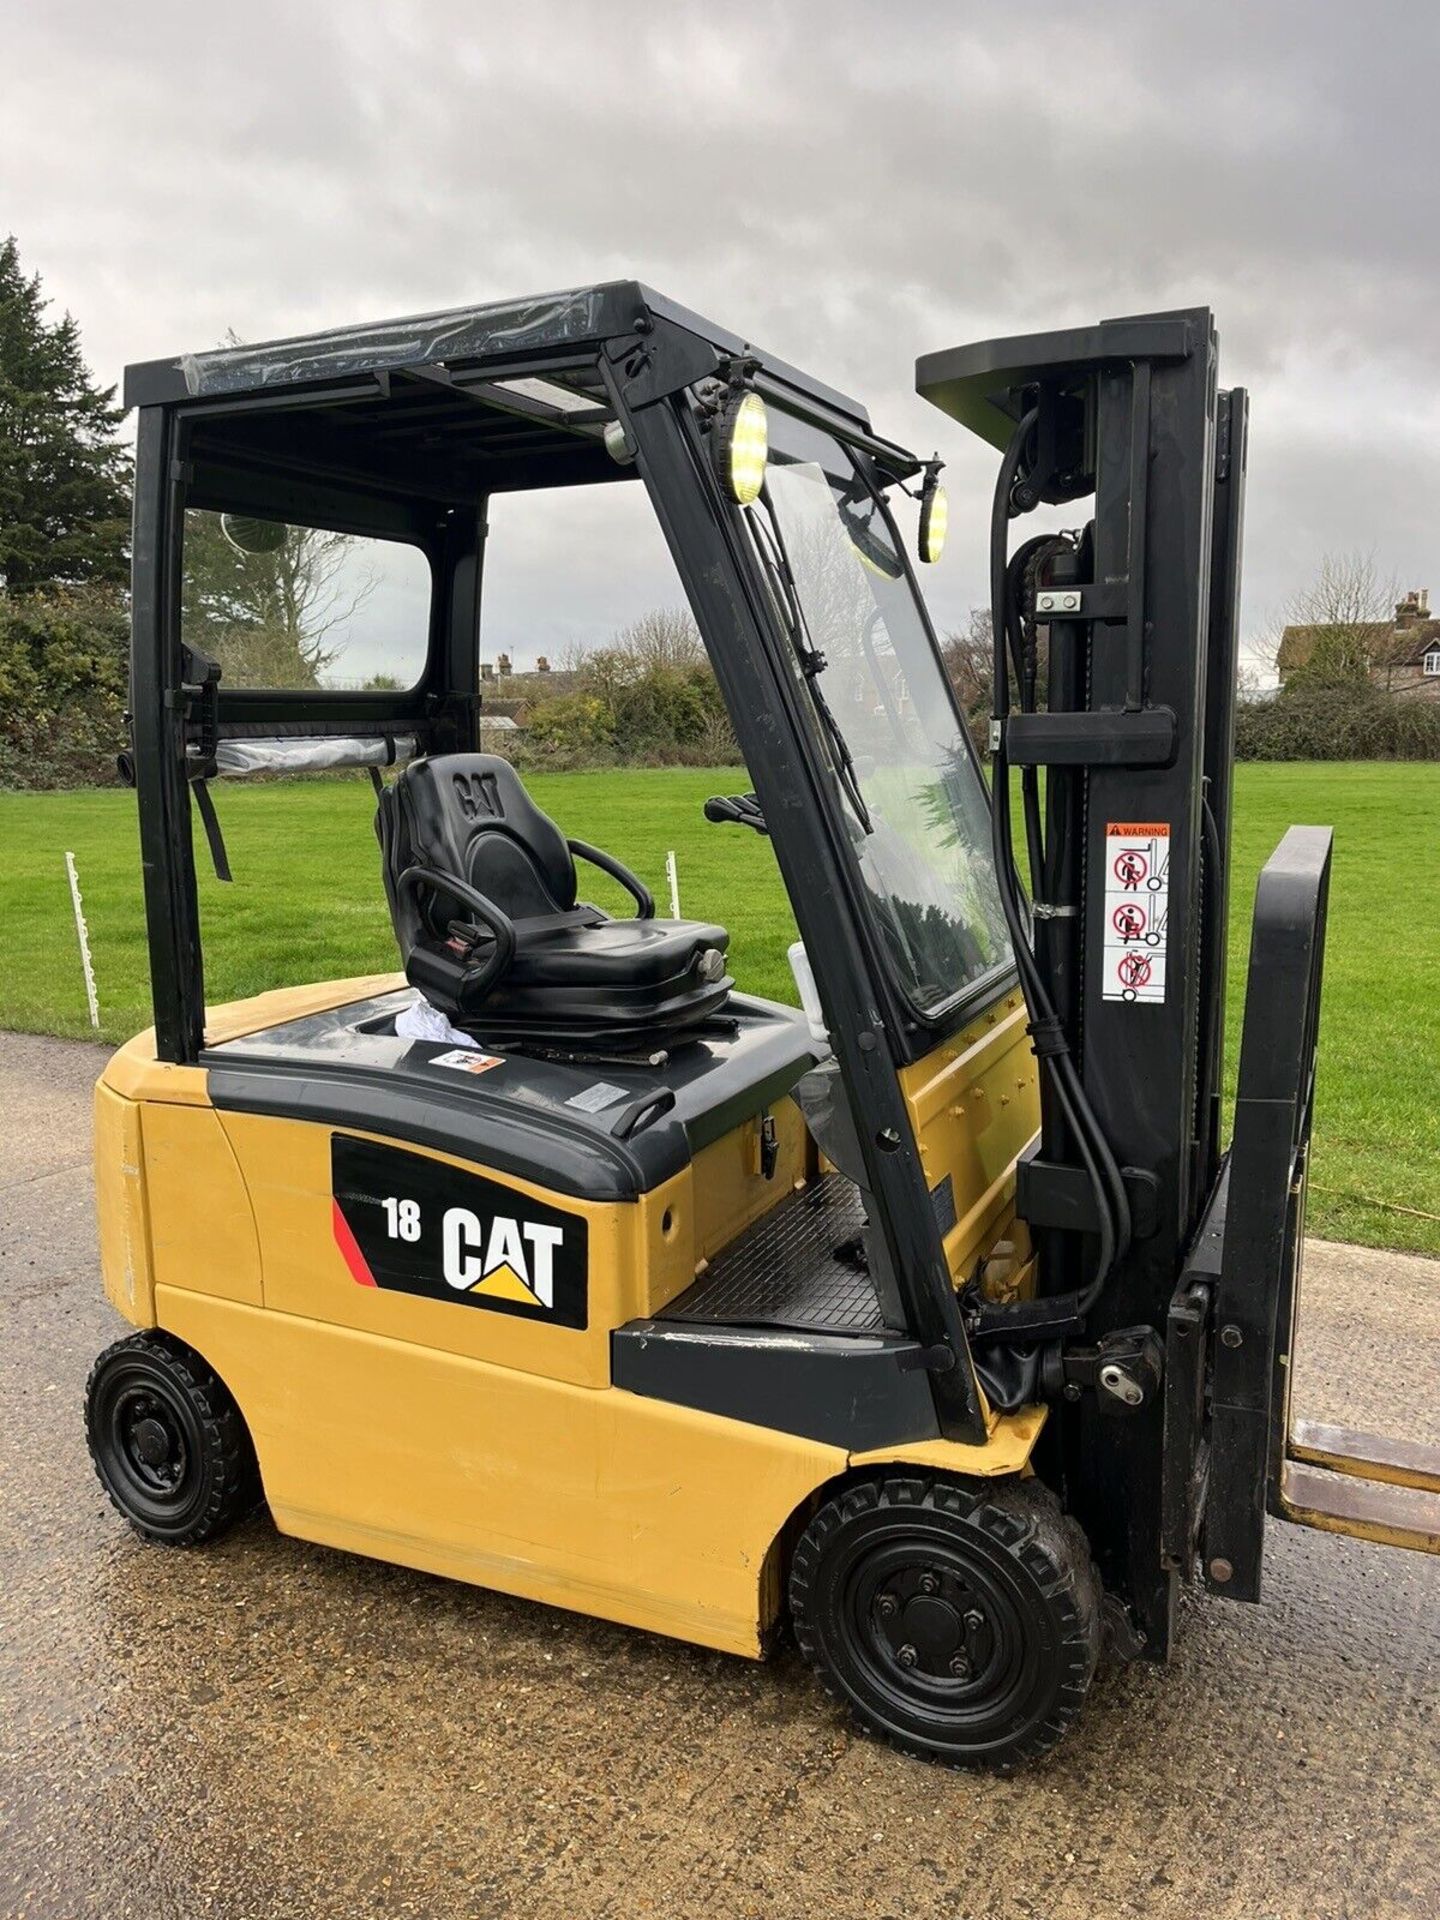 CATERPILLAR 1.8 Electric Forklift Truck (Container Spec) - Image 7 of 7